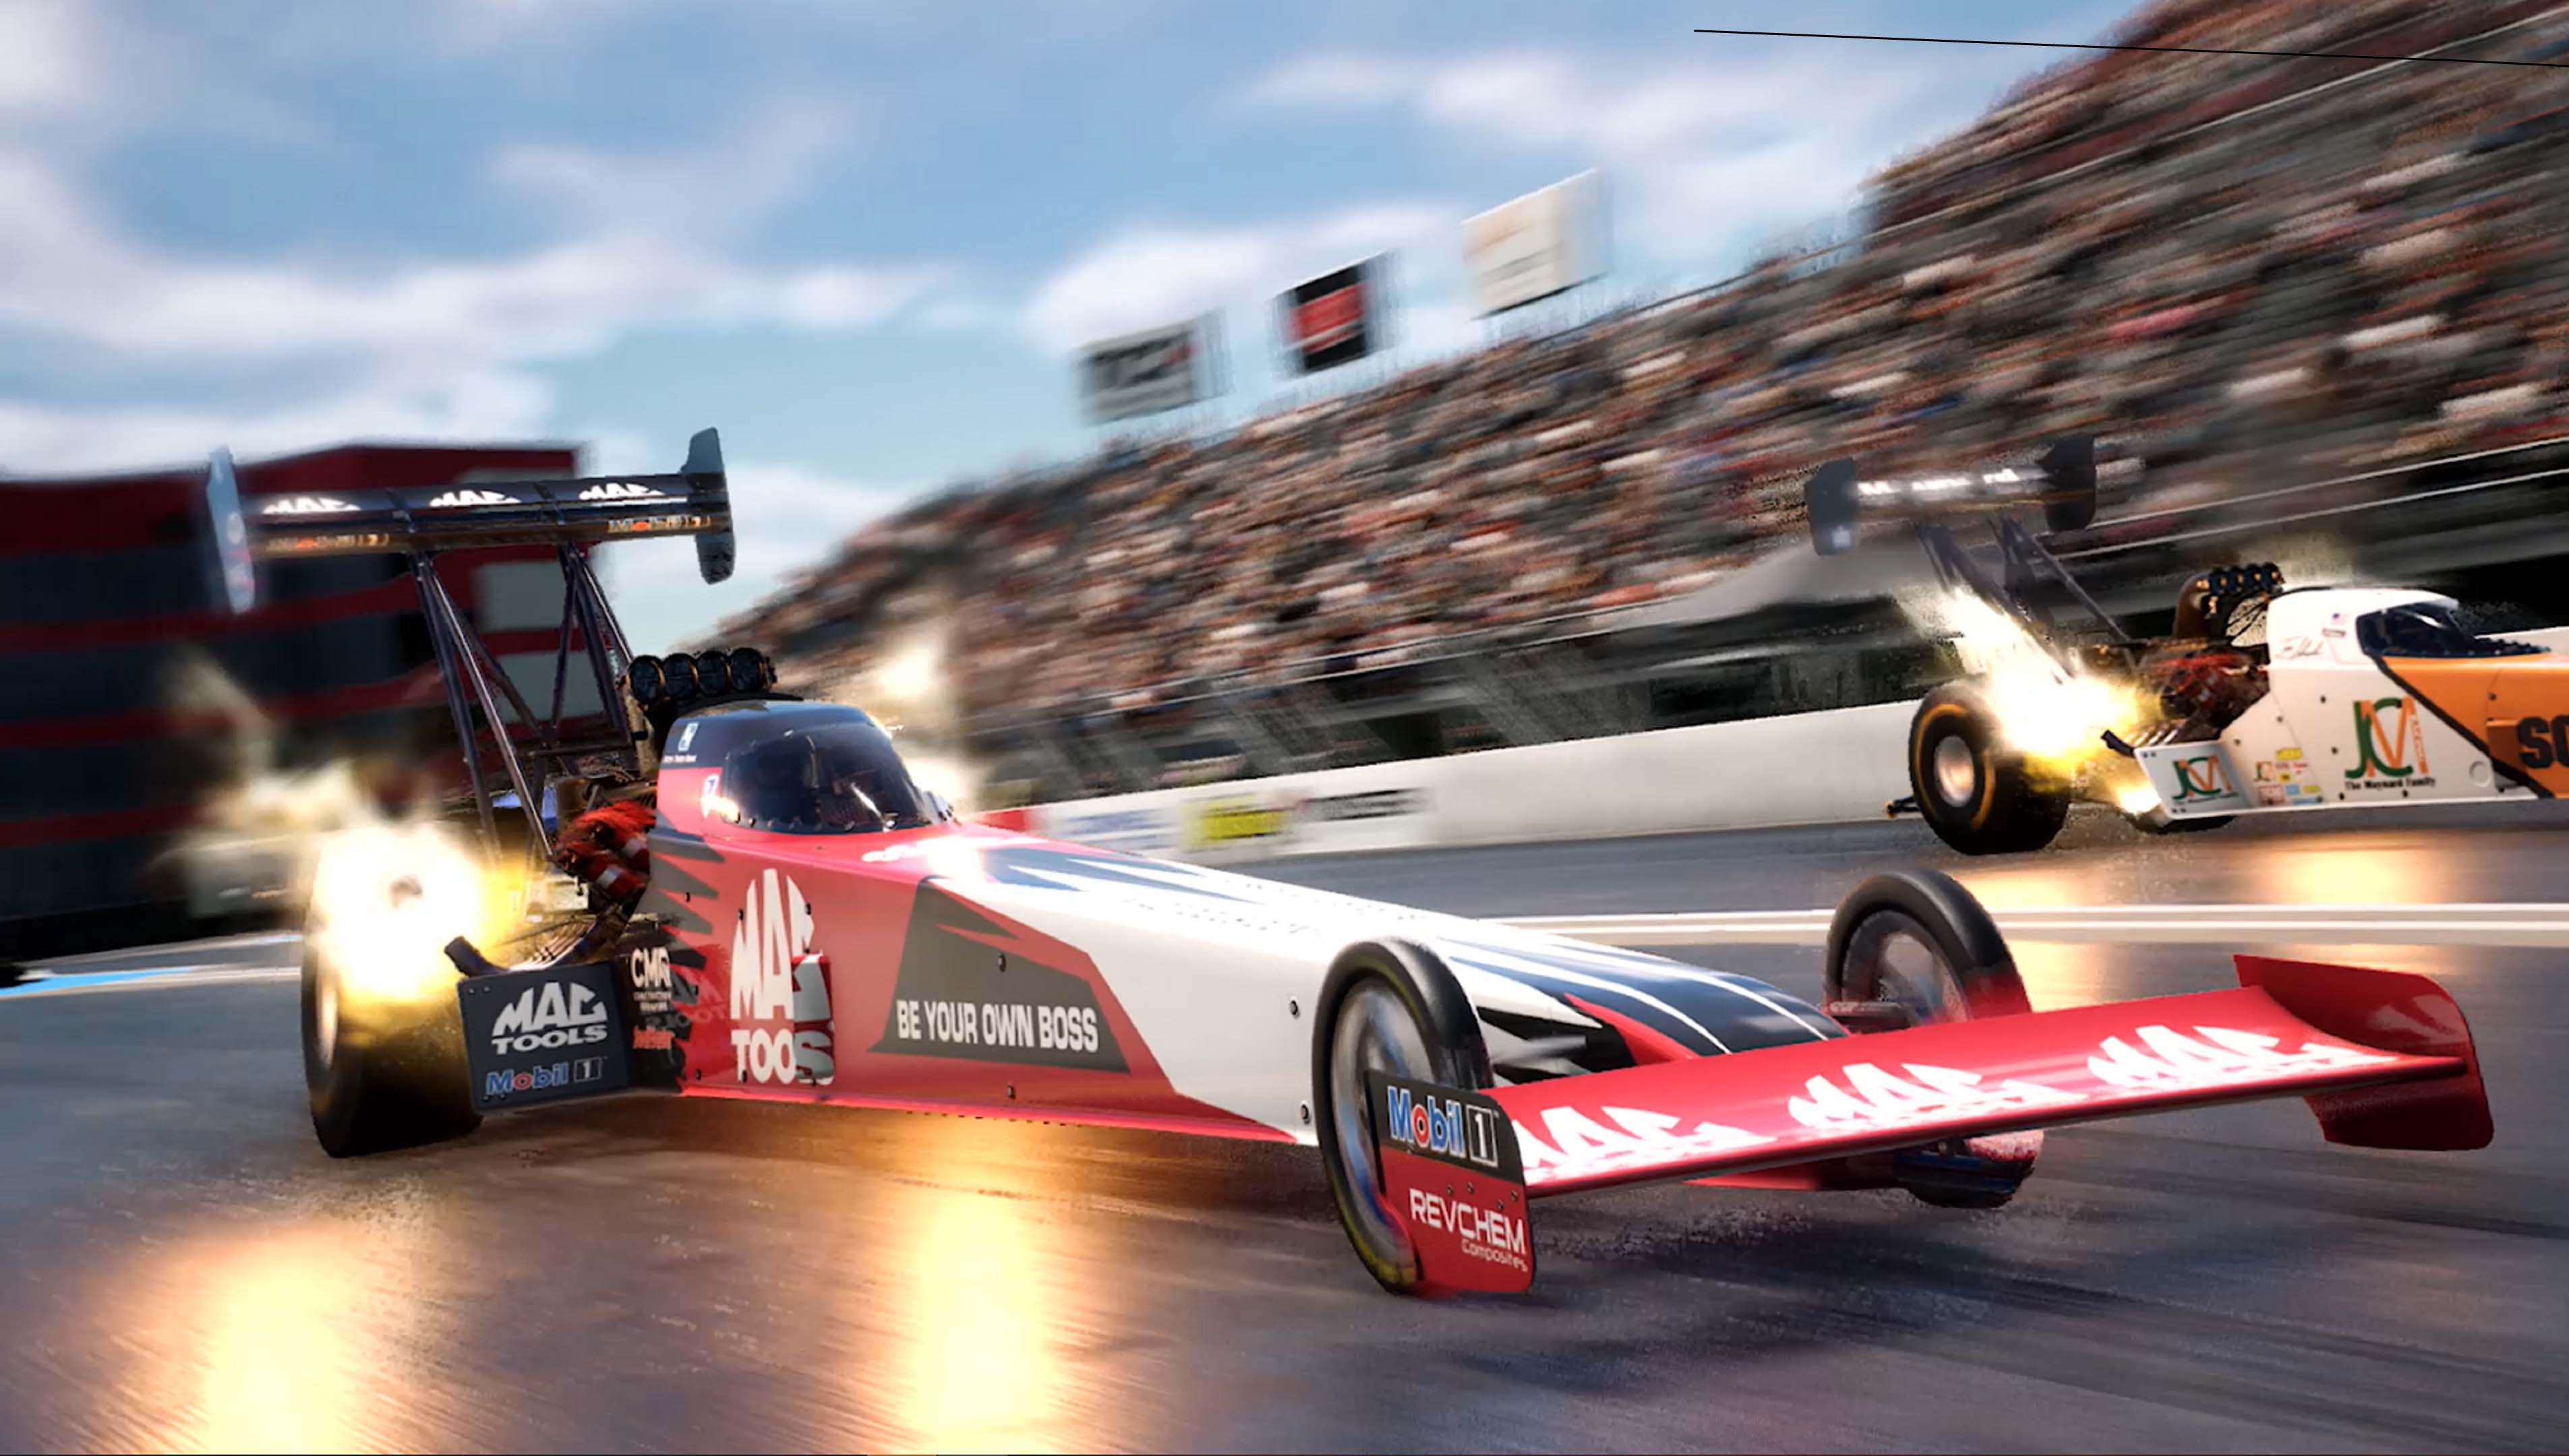  NHRA: Speed for All - PlayStation 4 : Game Mill Entertainment:  Video Games